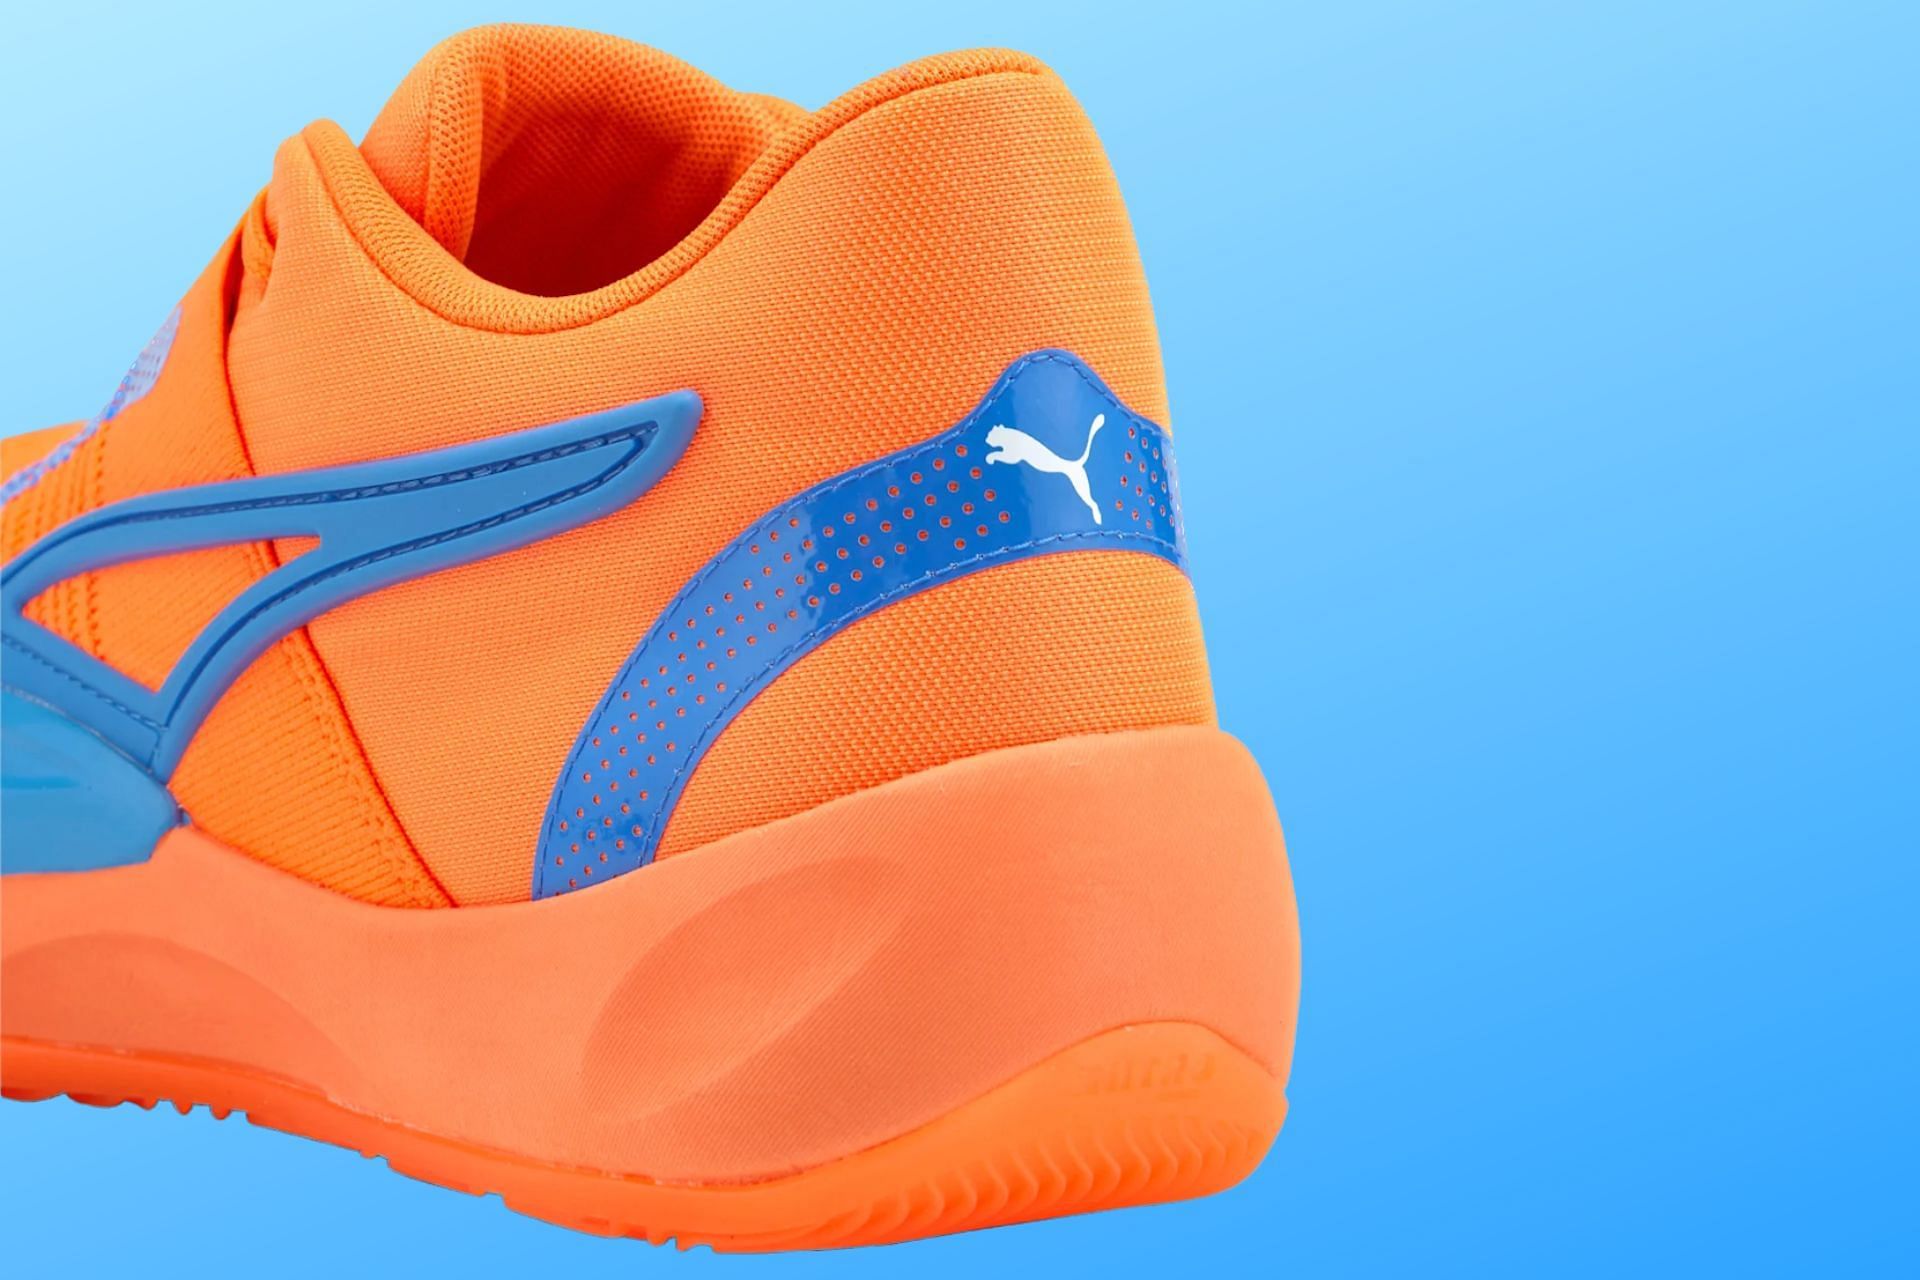 Take a closer look at the heel counters of the new colorway (Image via Sportskeeda)